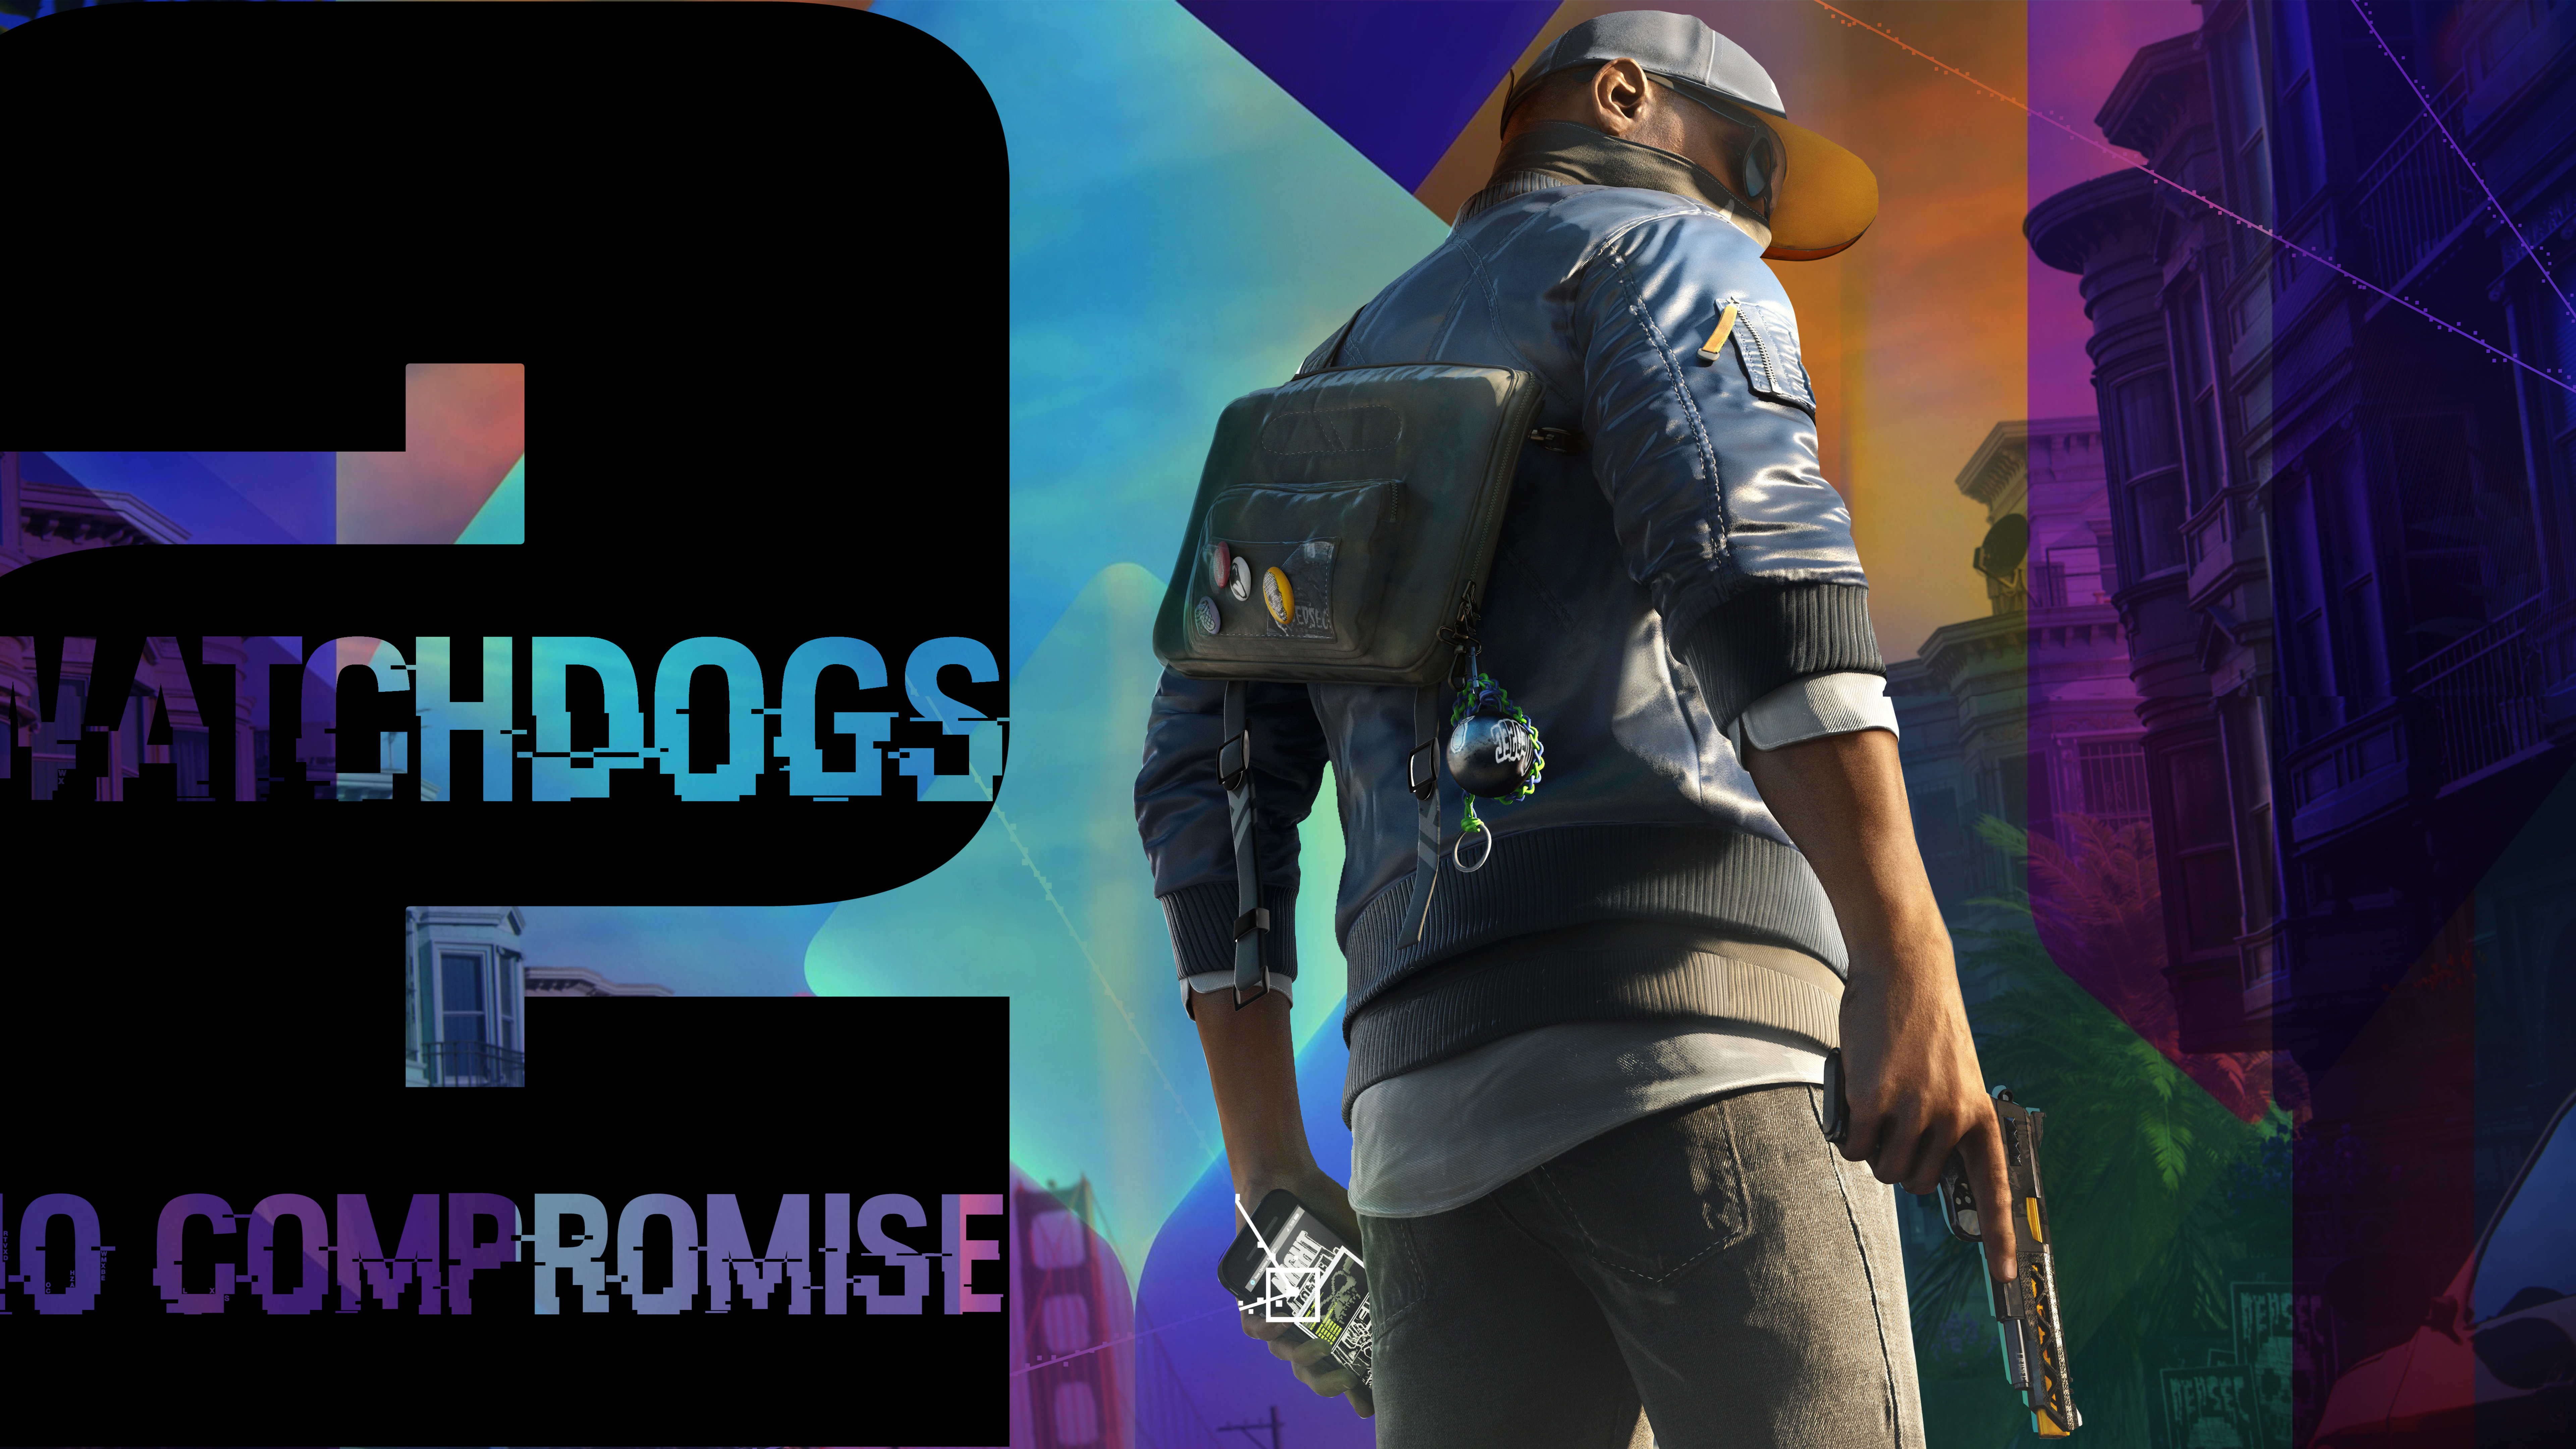 7680x43 Watch Dogs 2 No Compromise Dlc 8k 8k Hd 4k Wallpapers Images Backgrounds Photos And Pictures